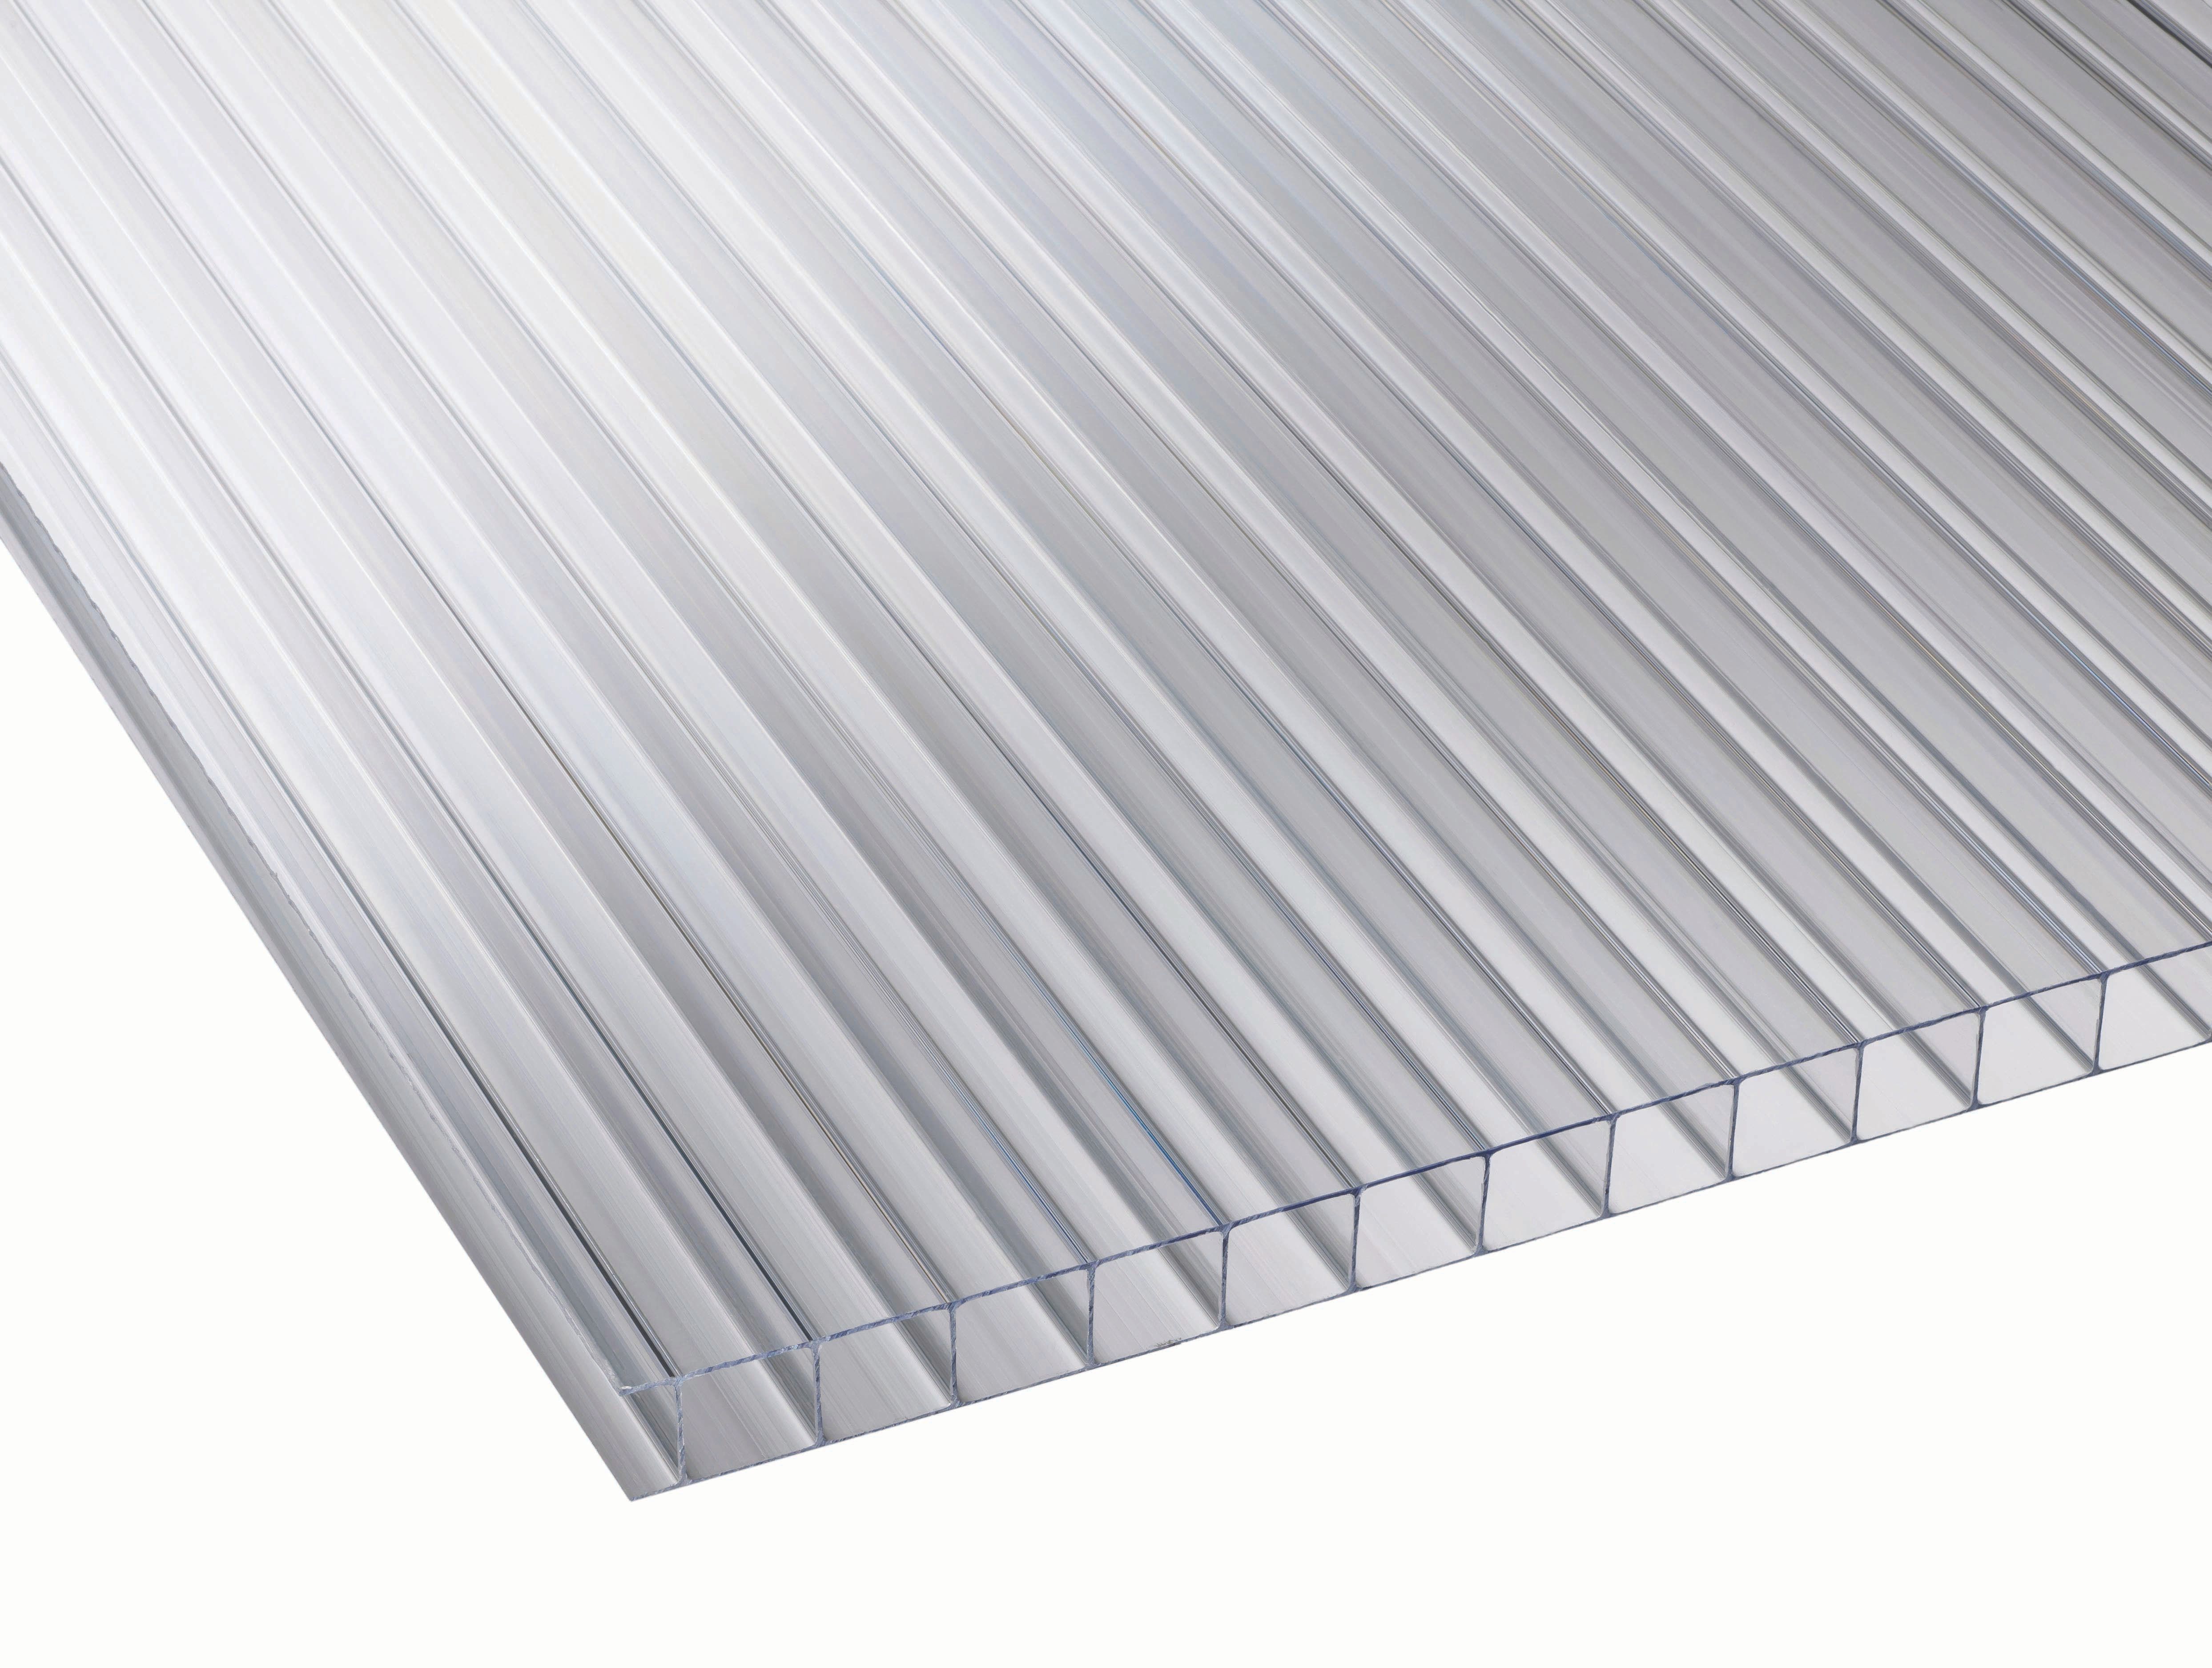 Image of 10mm Clear Multiwall Polycarbonate Sheet - 4000 x 1220mm